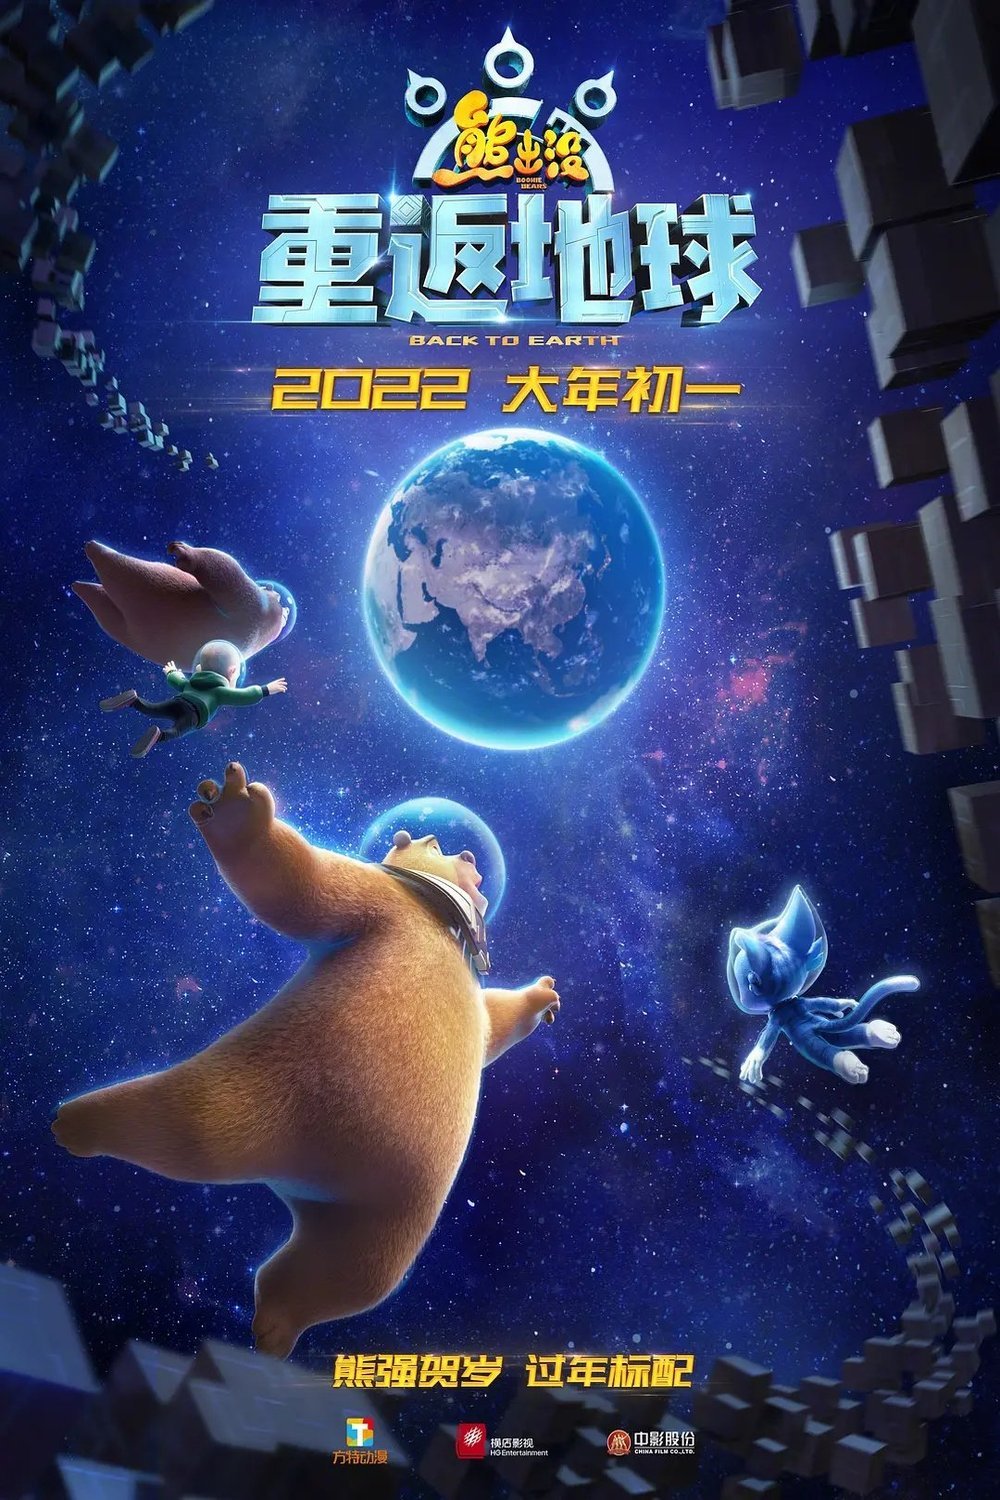 Mandarin poster of the movie Les Ours Boonie: Retour sur terre